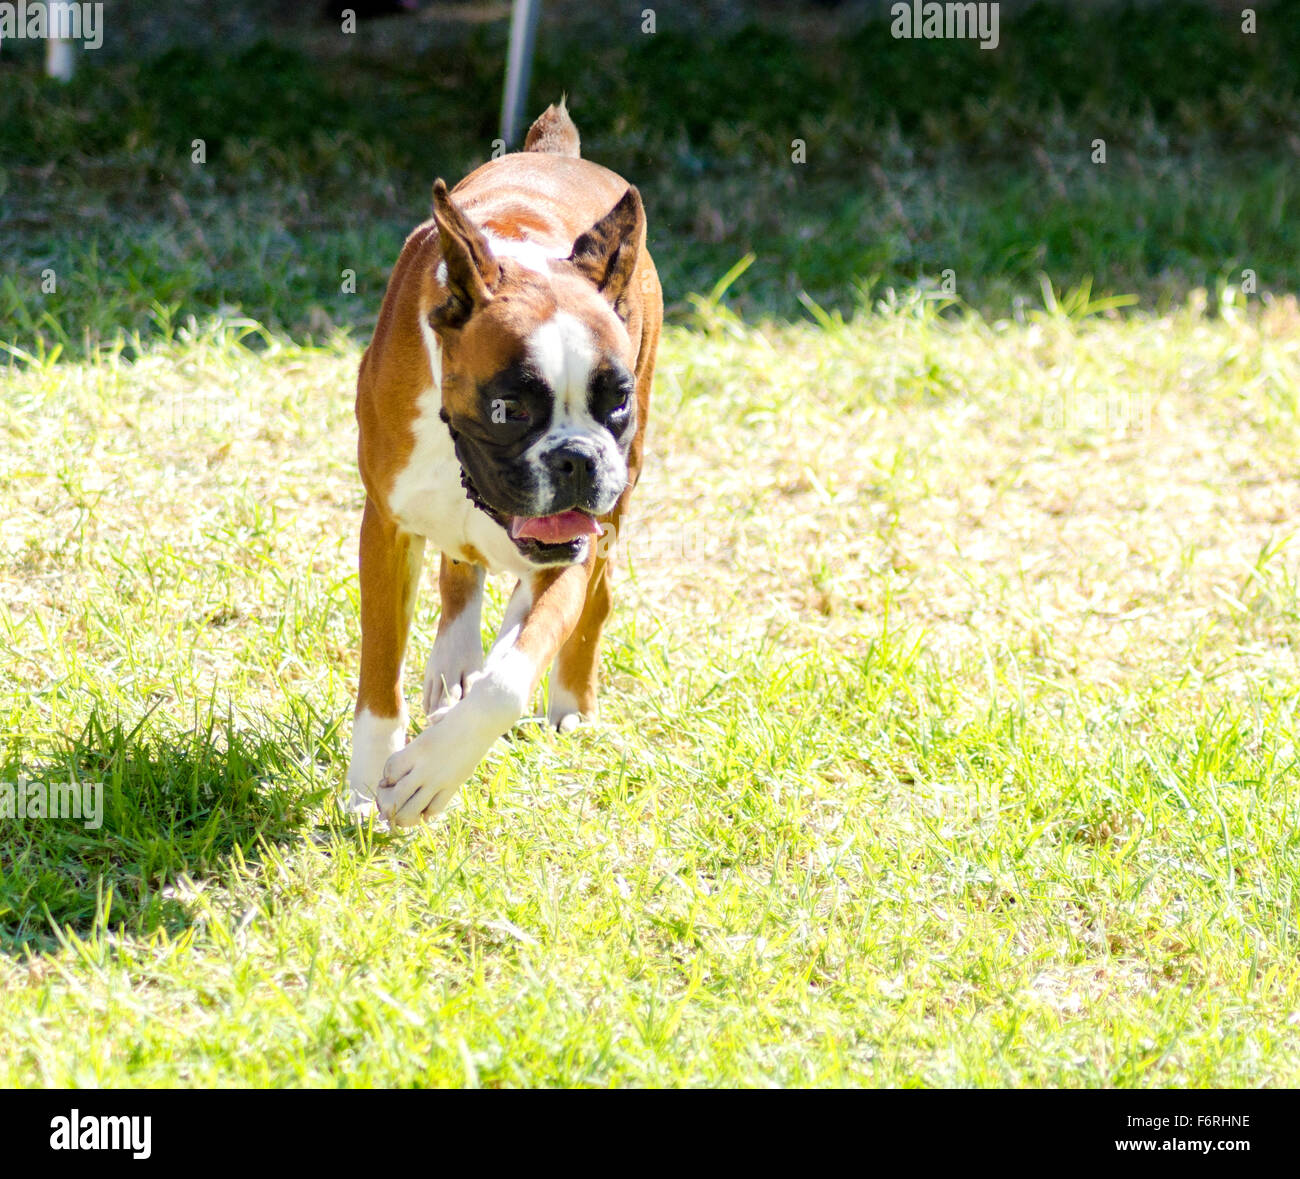 A young, beautiful, fawn red mahogany and white, medium sized Boxer dog with cropped ears running on the grass. Boxers have a sh Stock Photo